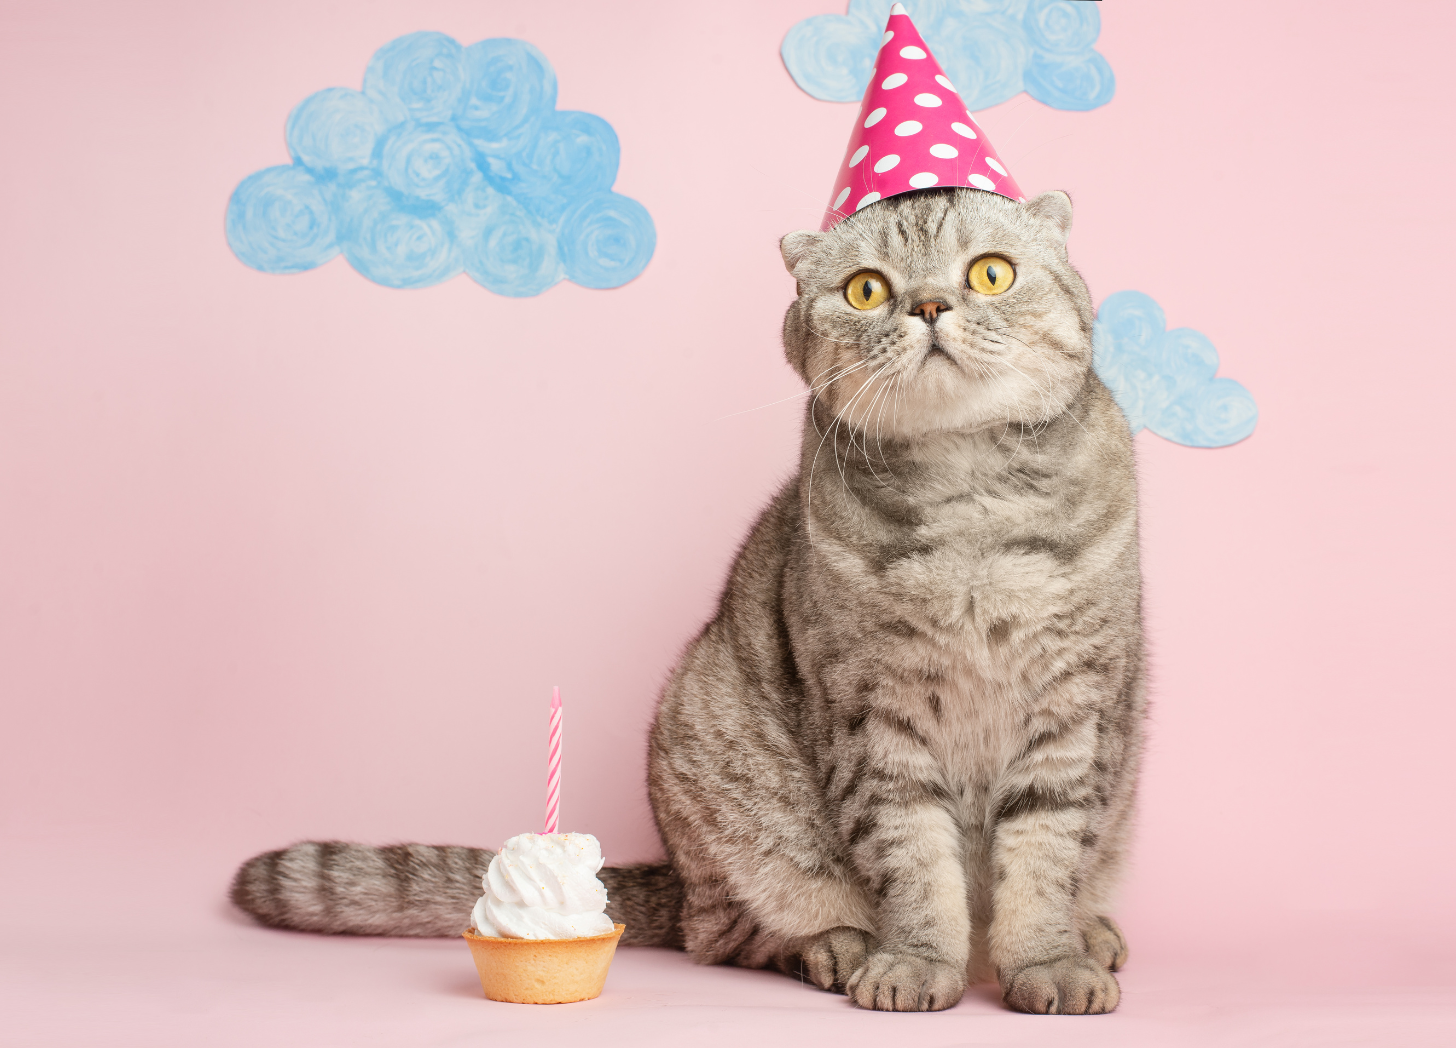 Grey cat on pink background with a cupcake and a party hat on with clouds in the background.